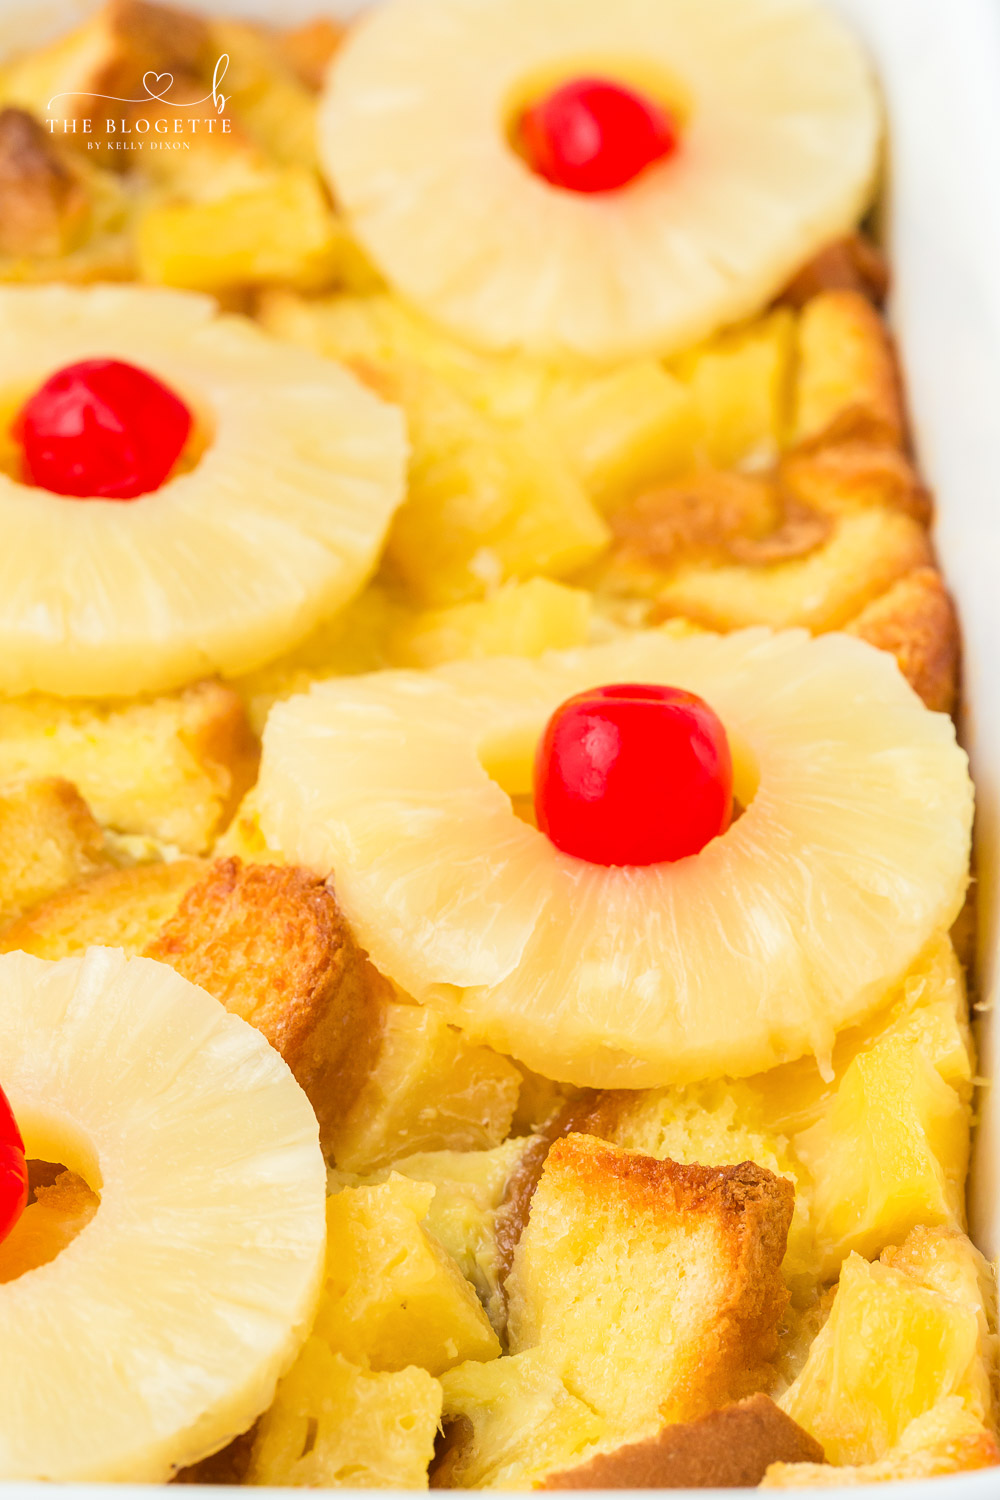 Pineapple Casserole is a classic comforting dish that is great for holidays or as a comforting meal, side dish, or even dessert!